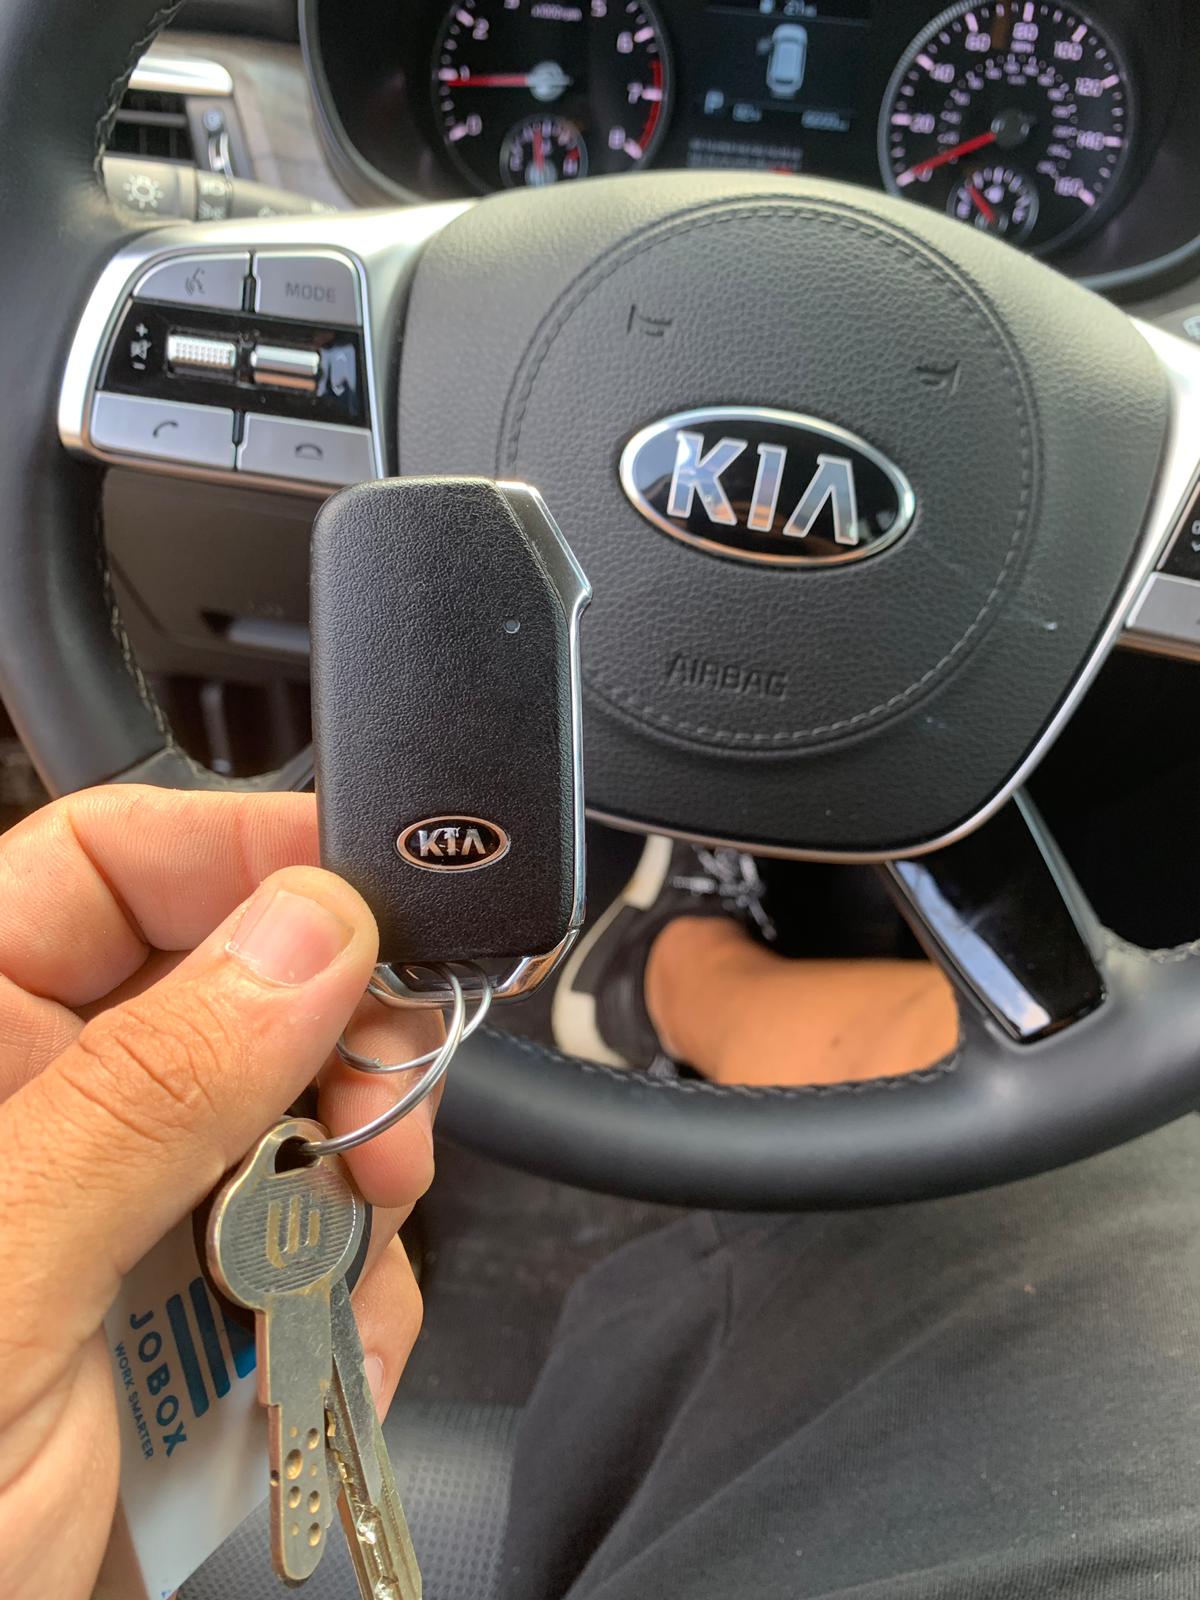 Kia Car Key Replacement What To Do, Options, Tips, Costs & More